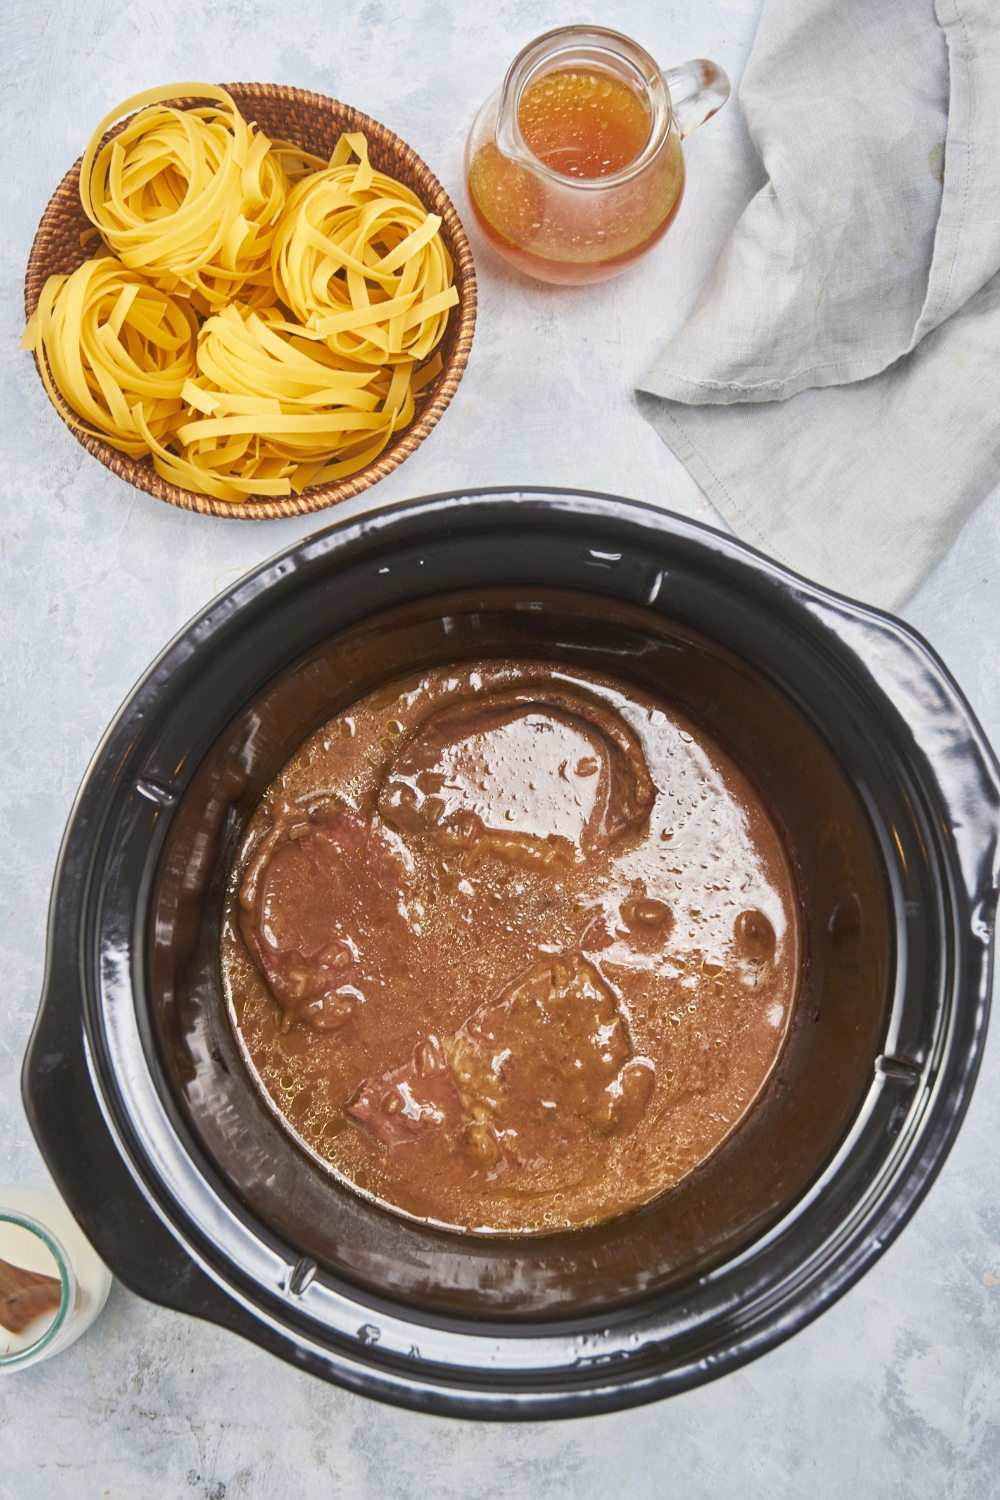 Black crockpot with three cooked steaks covered in a brown sauce. The crockpot is next to a bowl of dried pasta and a jar of broth.